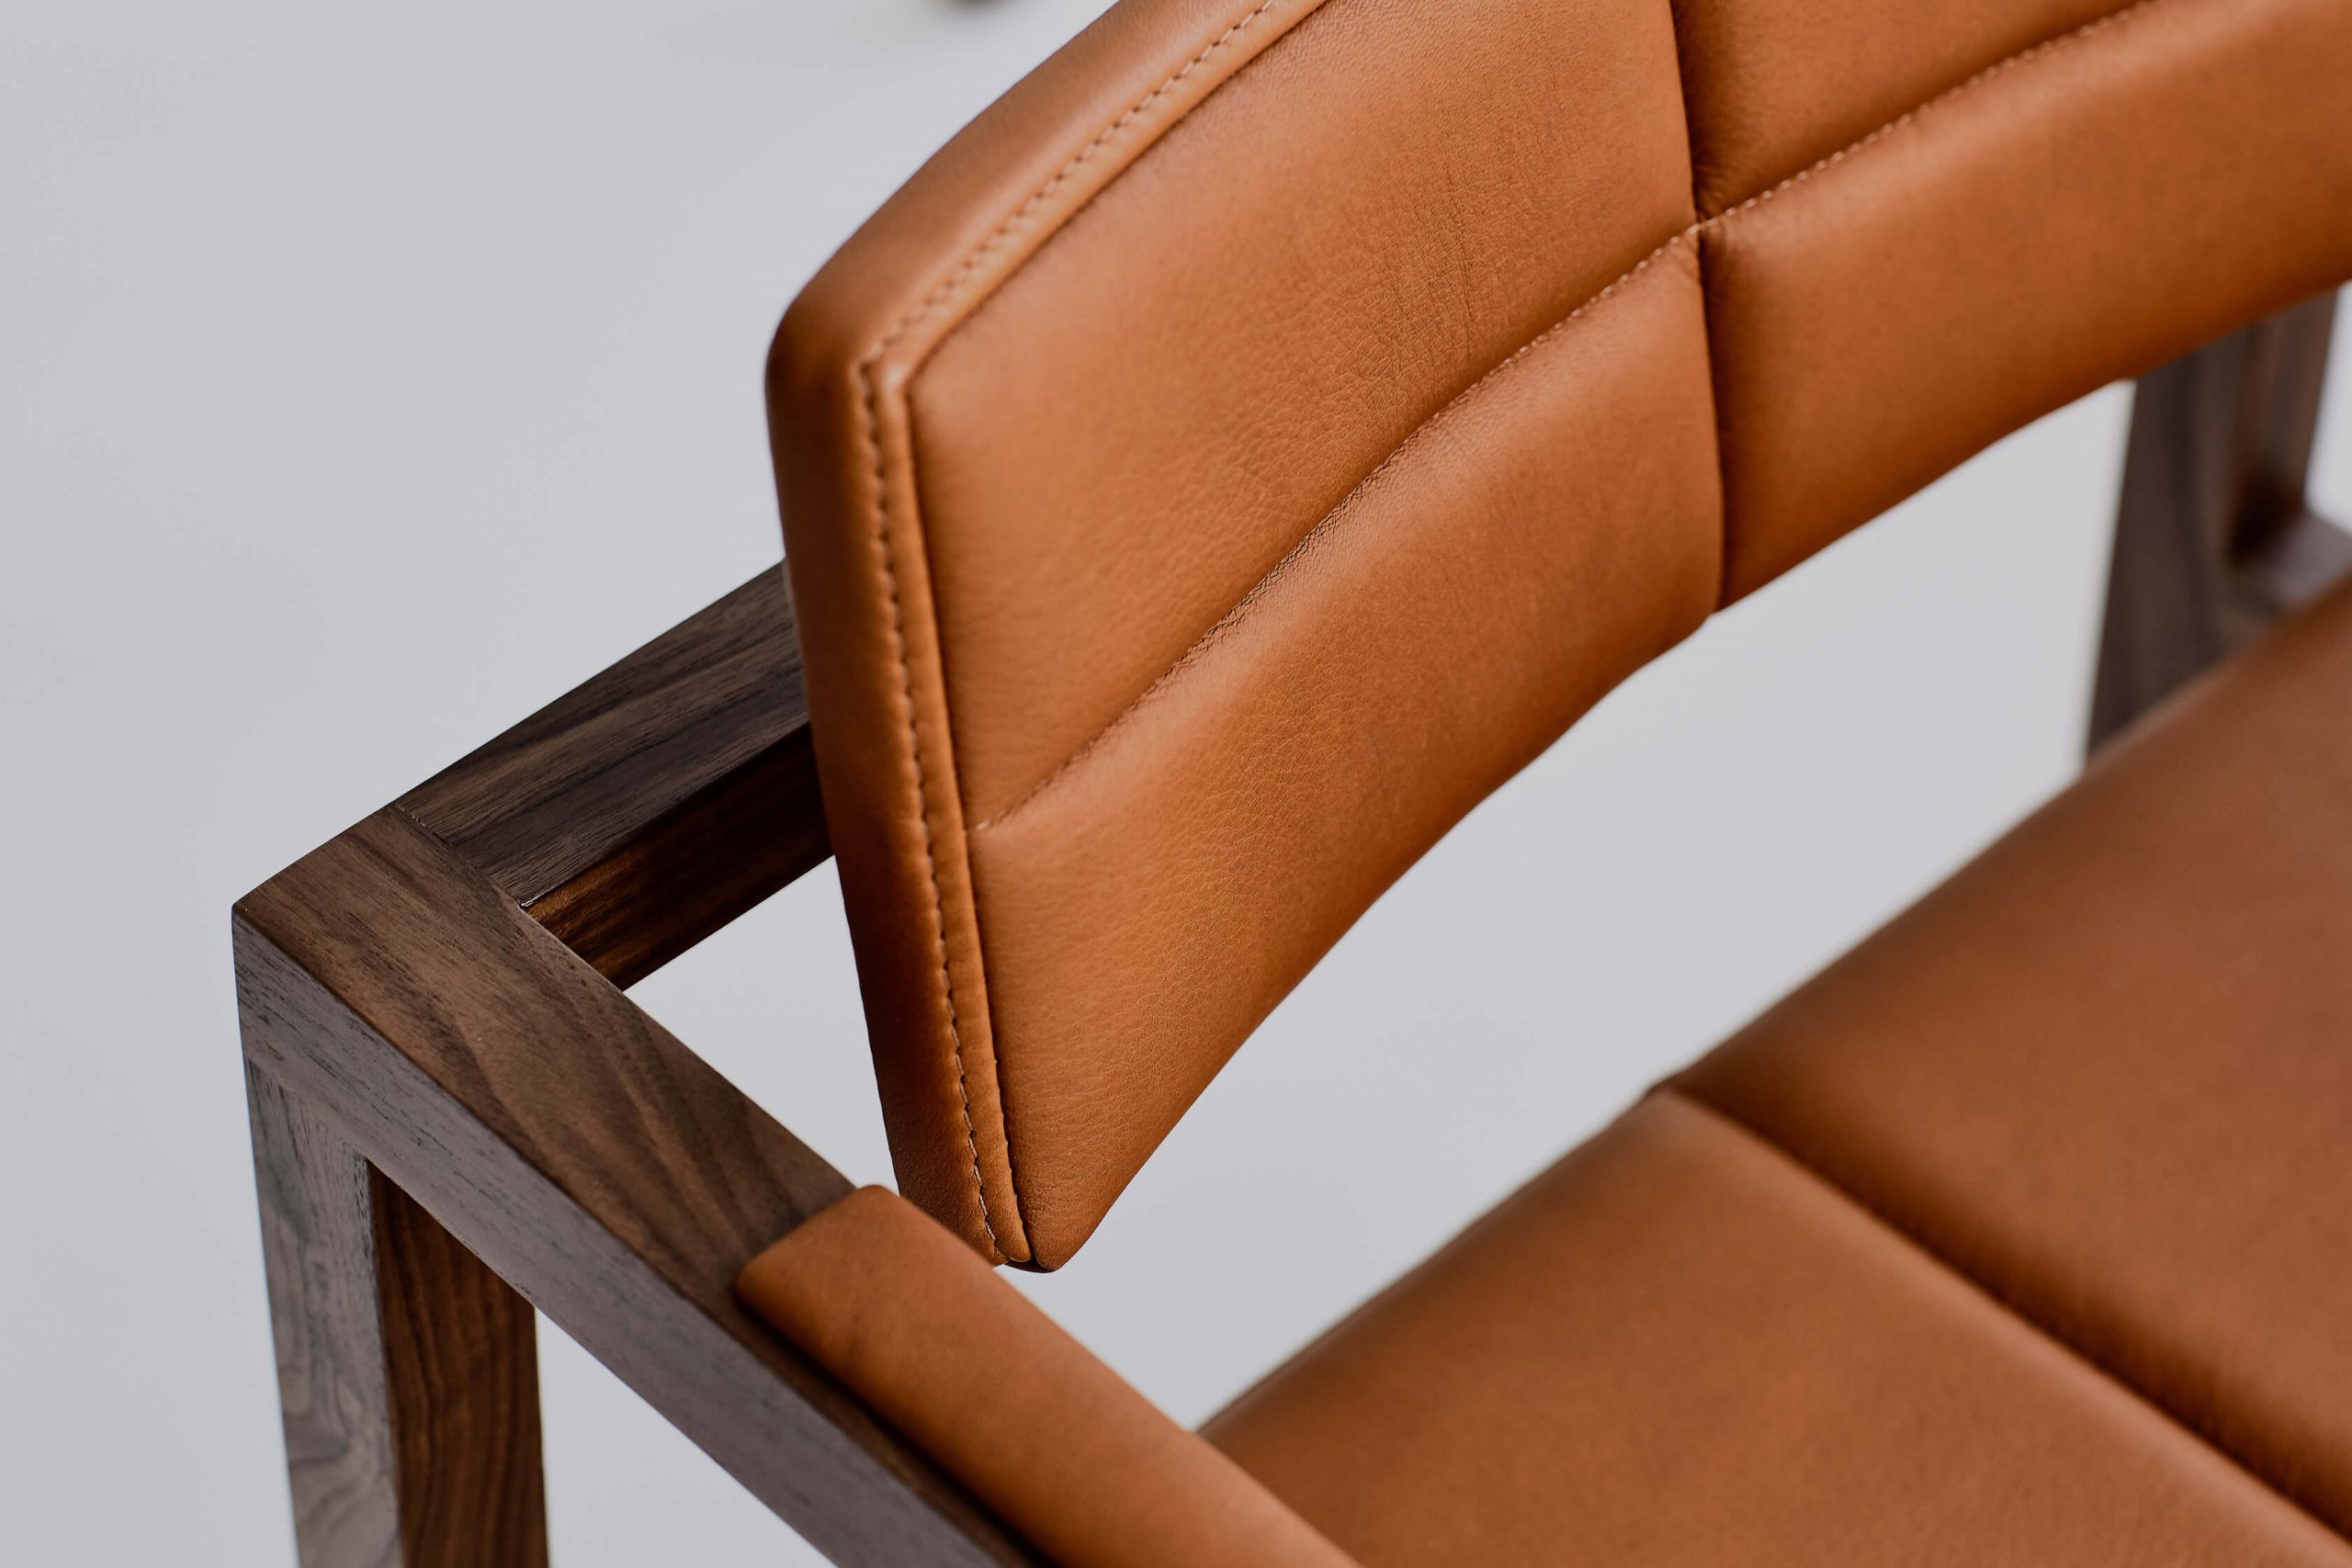 Soft light shows the beautiful natural qualities of this premium leather on the designer chairs by Australian designer FrancoCrea